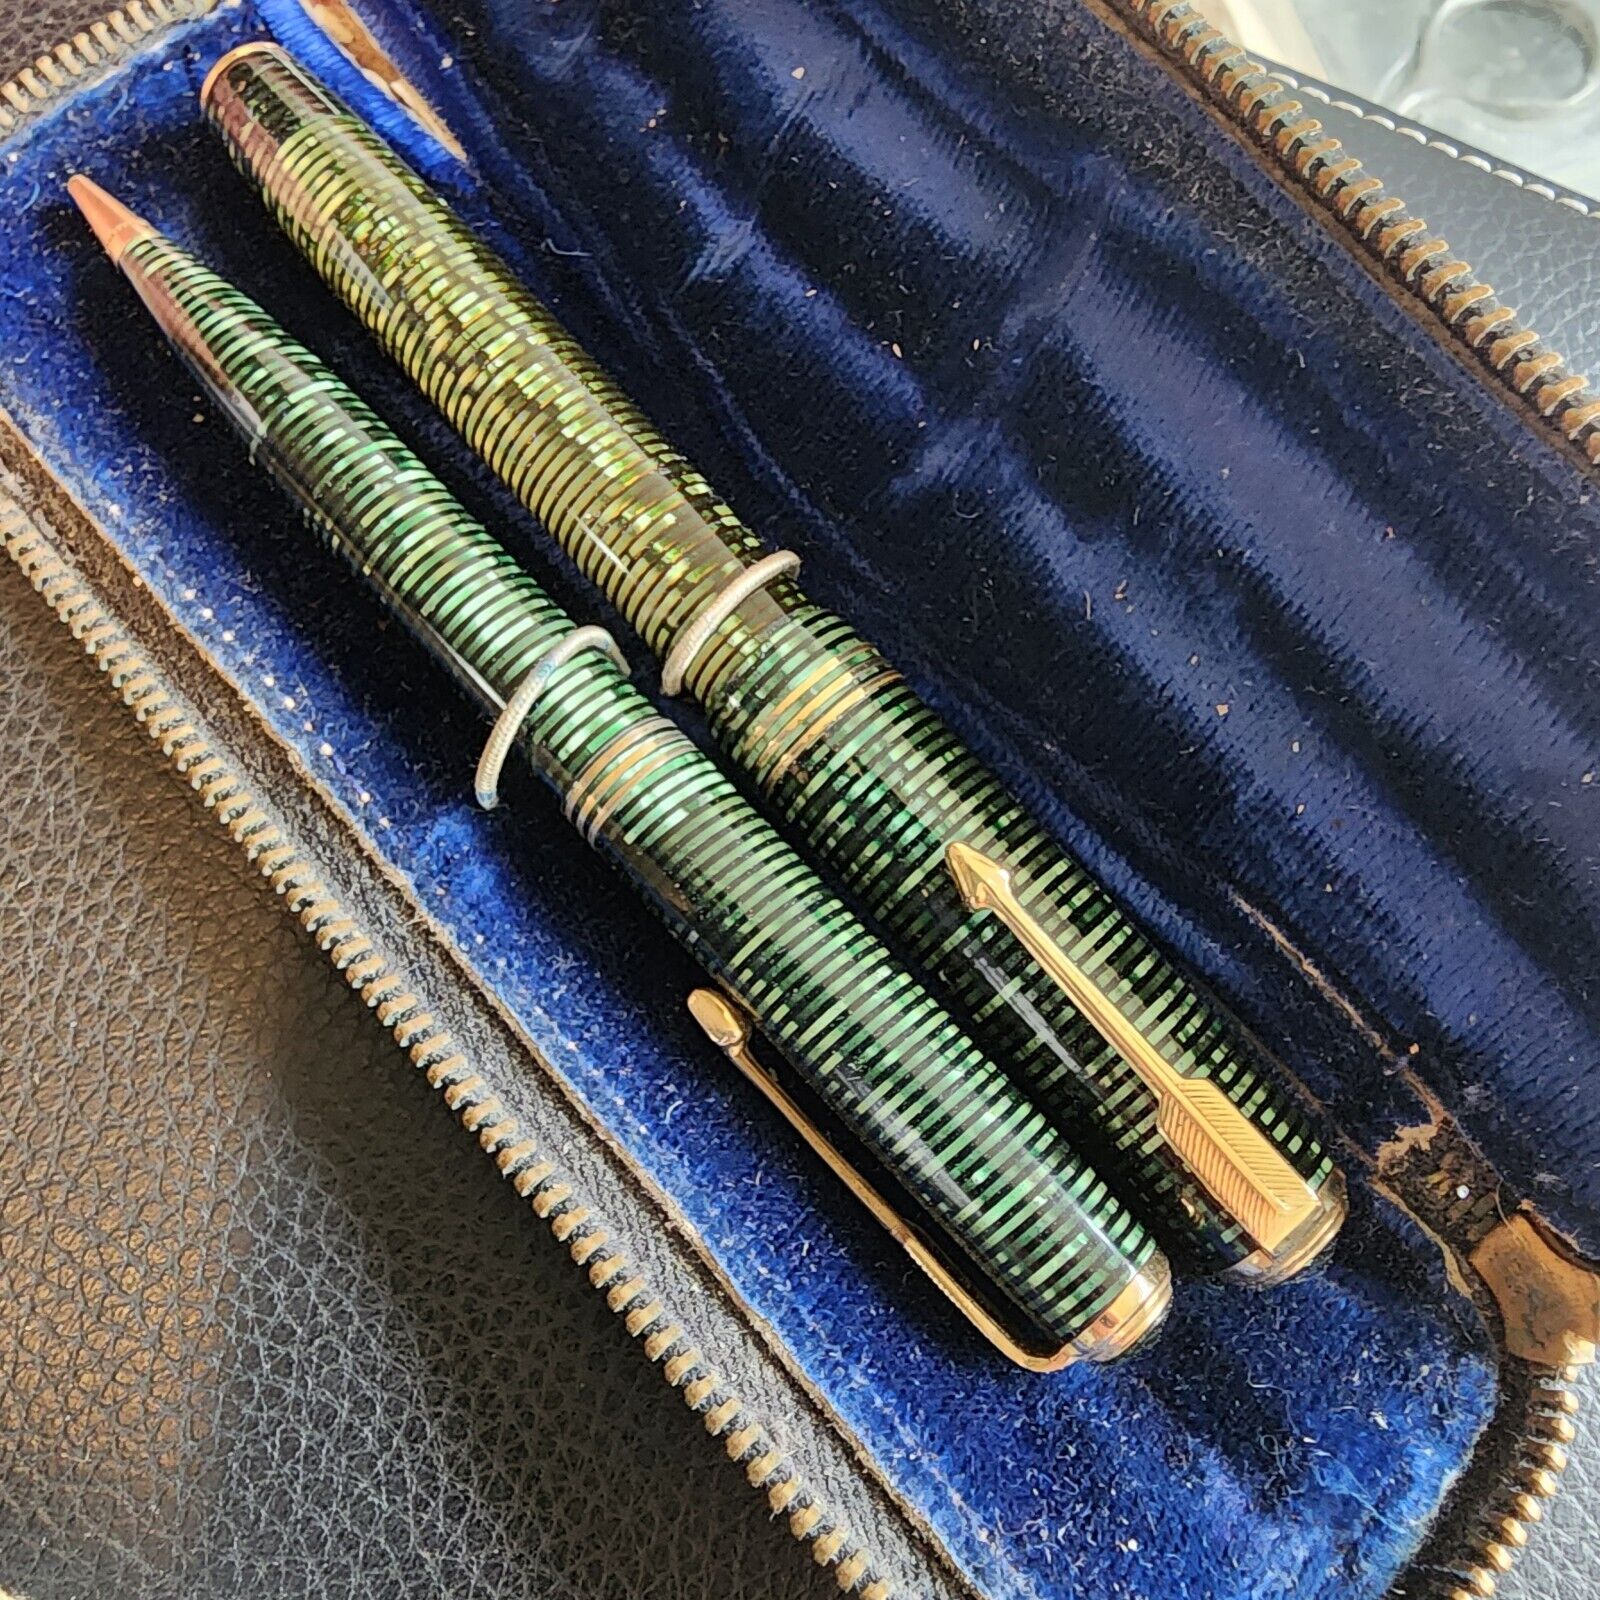 1936 Parker Vacumatic Green Celluloid Fountain Pen And Pencil... New Sac...